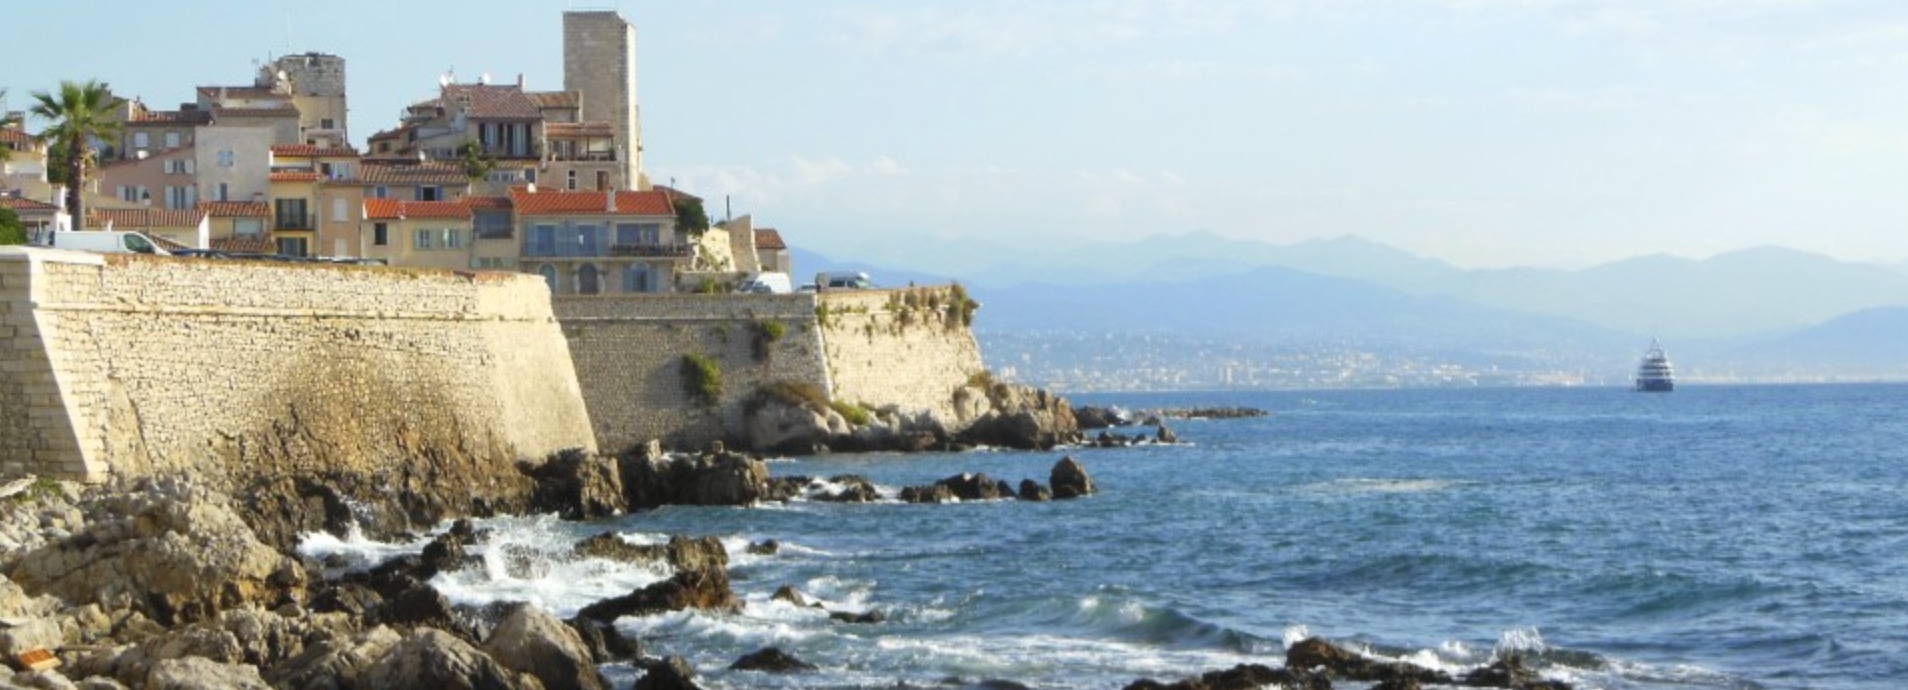 The fortress of Antibes against crashing waves